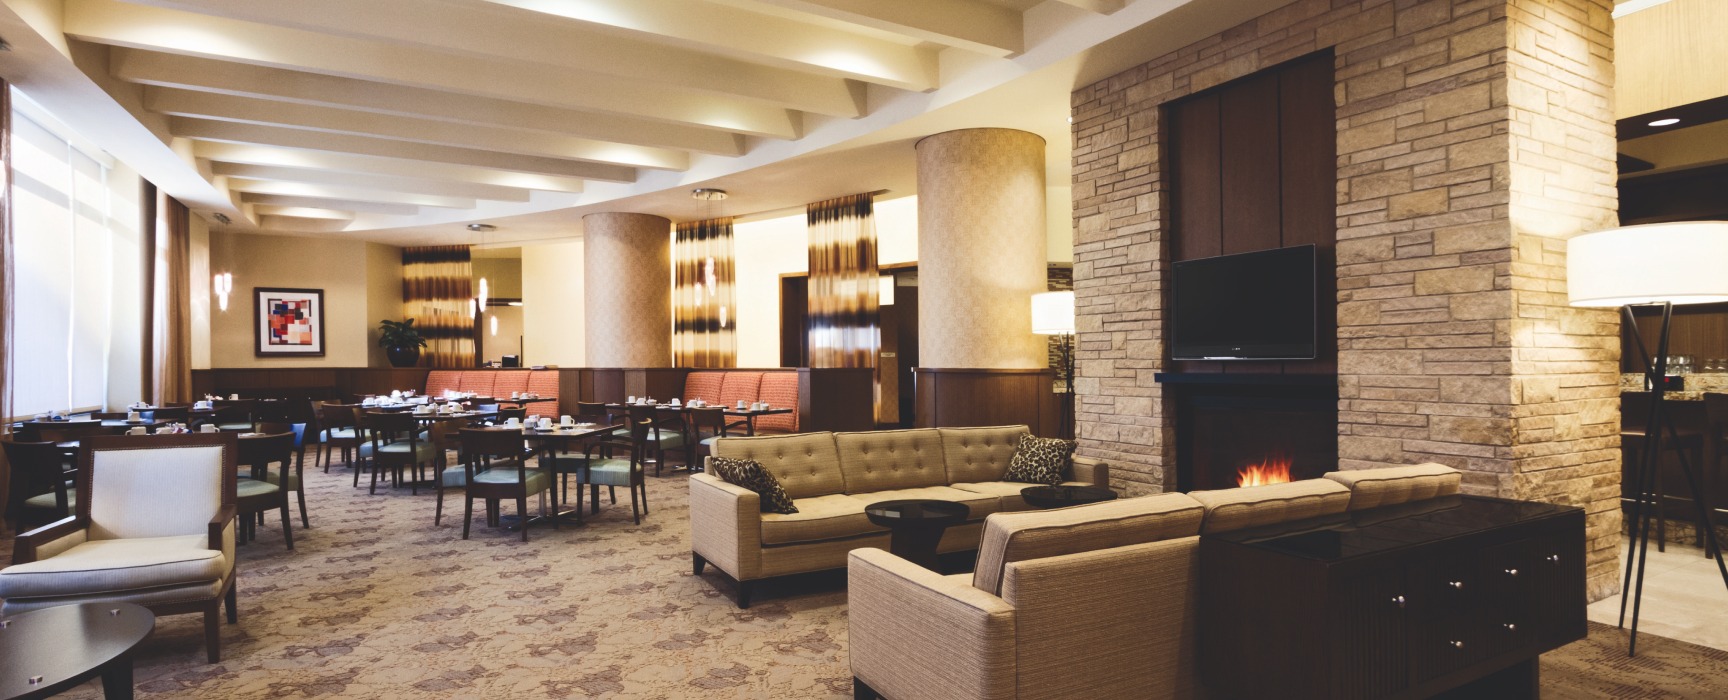 Lobby featuring warm tones and a large fireplace with several cozy sitting areas inside of the Hilton Garden Inn in Harbor East